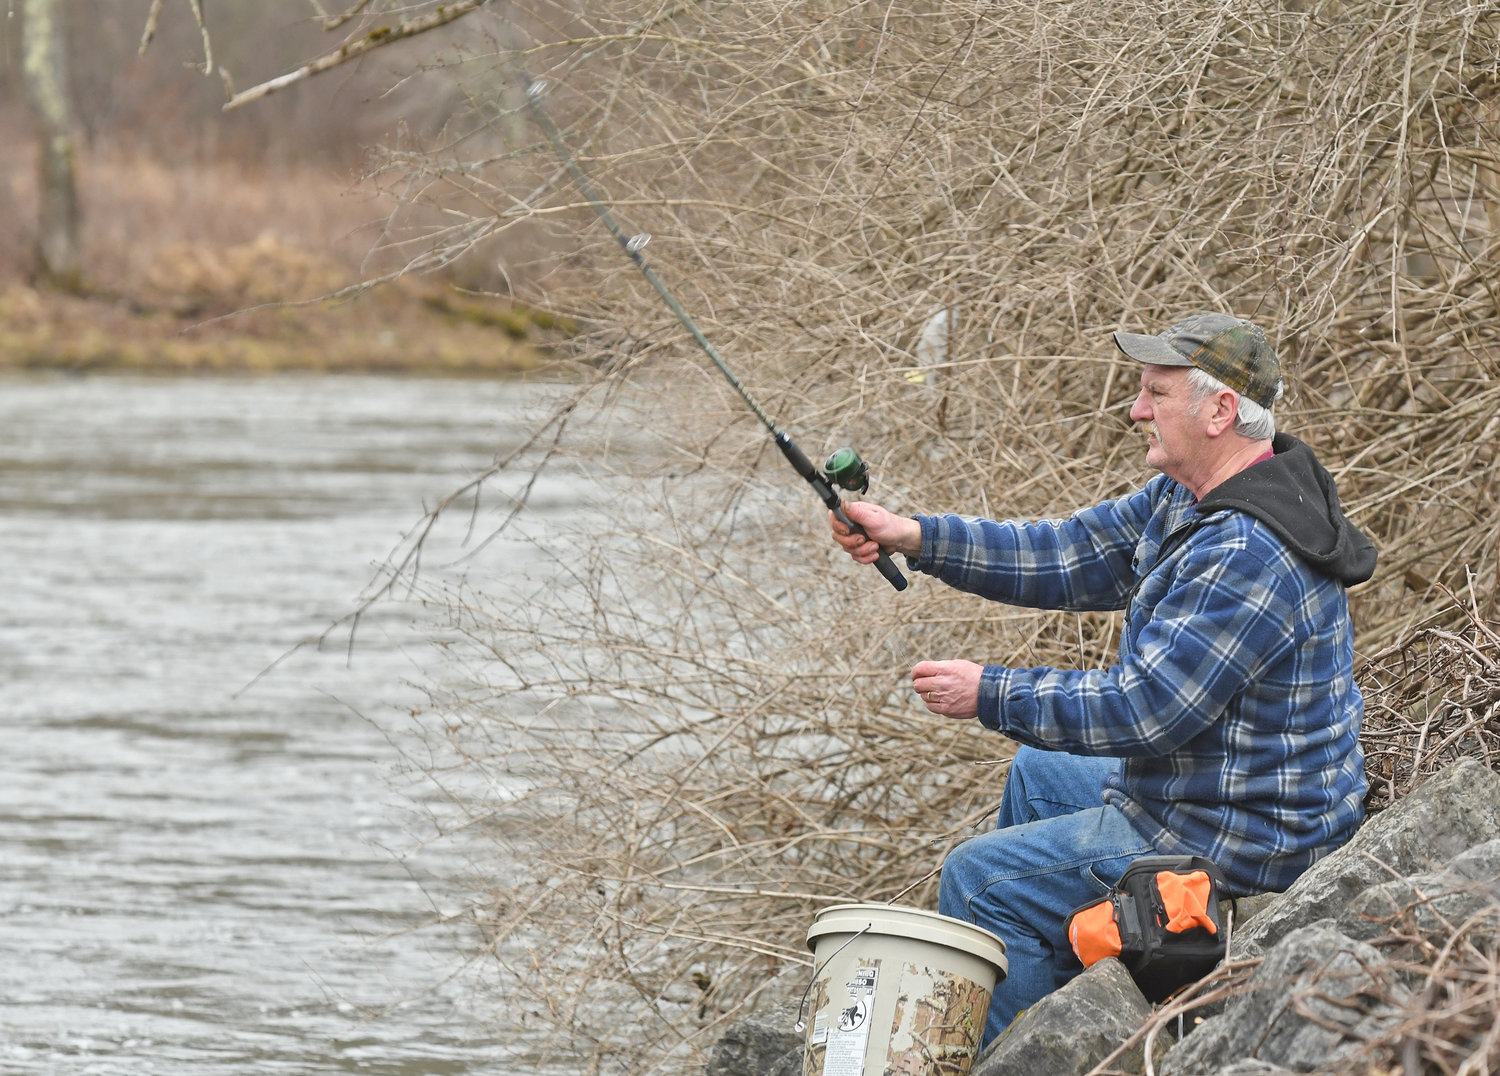 A fisherman casts his line out on the Mohawk River in this Daily Sentinel file photo. Gov. Kathy Hochul on Wednesday announced the 2023 dates for free freshwater fishing days in New York, including this weekend, Saturday and Sunday, Feb. 18-19.